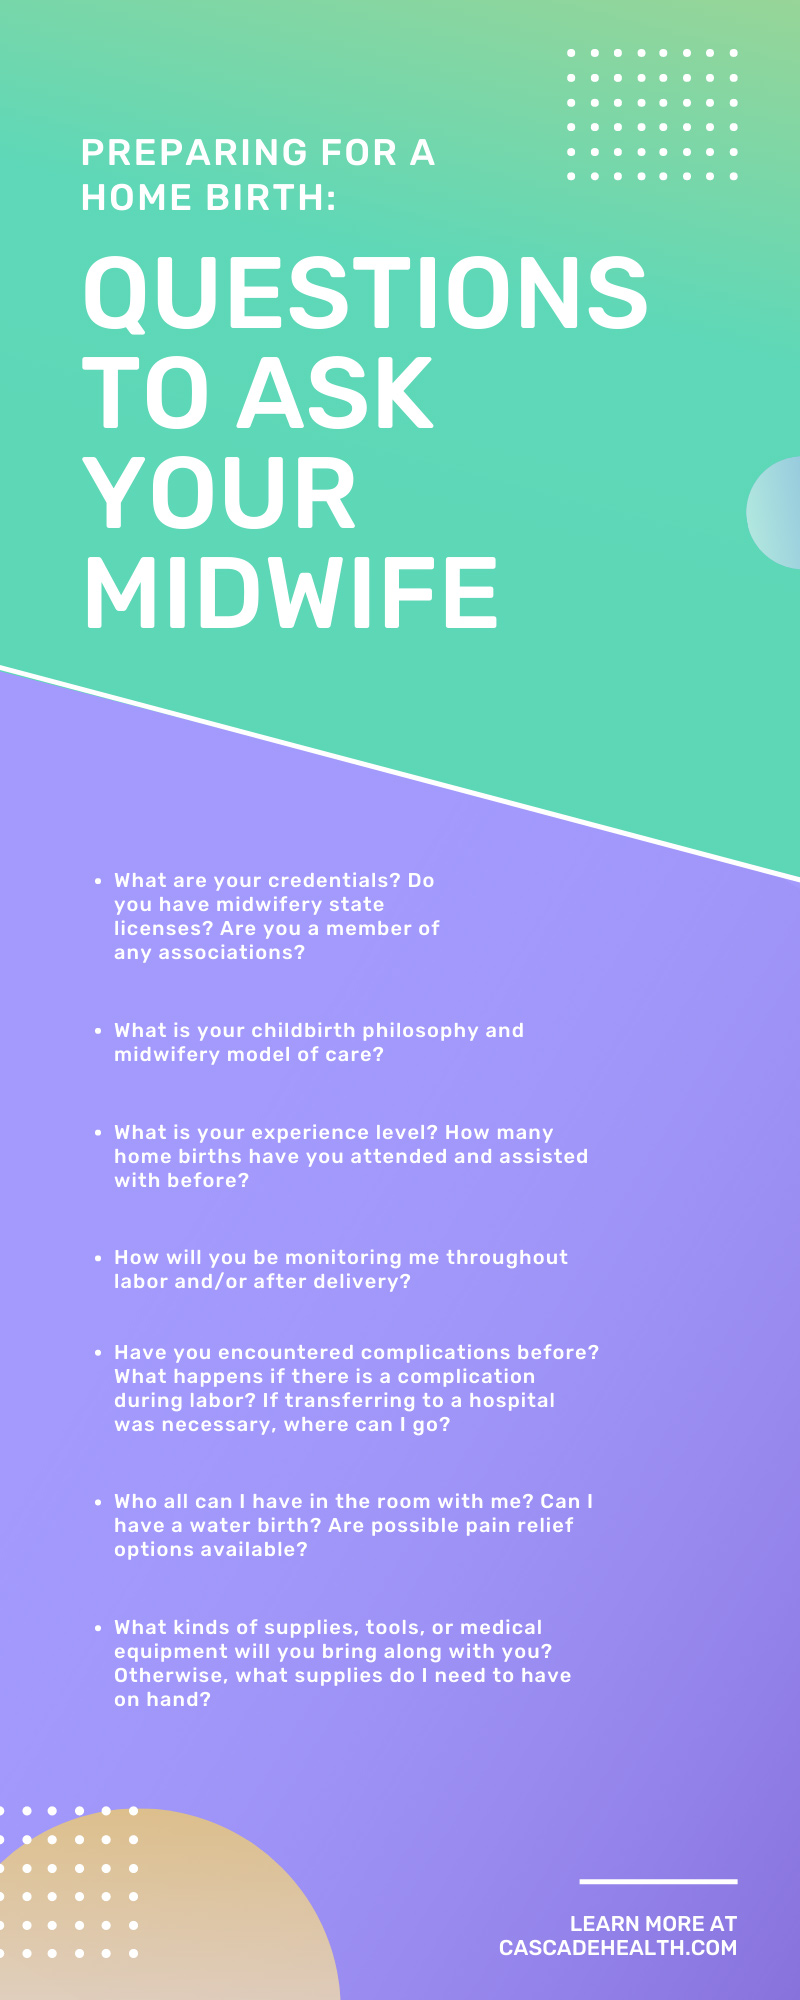 Preparing for a Home Birth: Questions To Ask Your Midwife